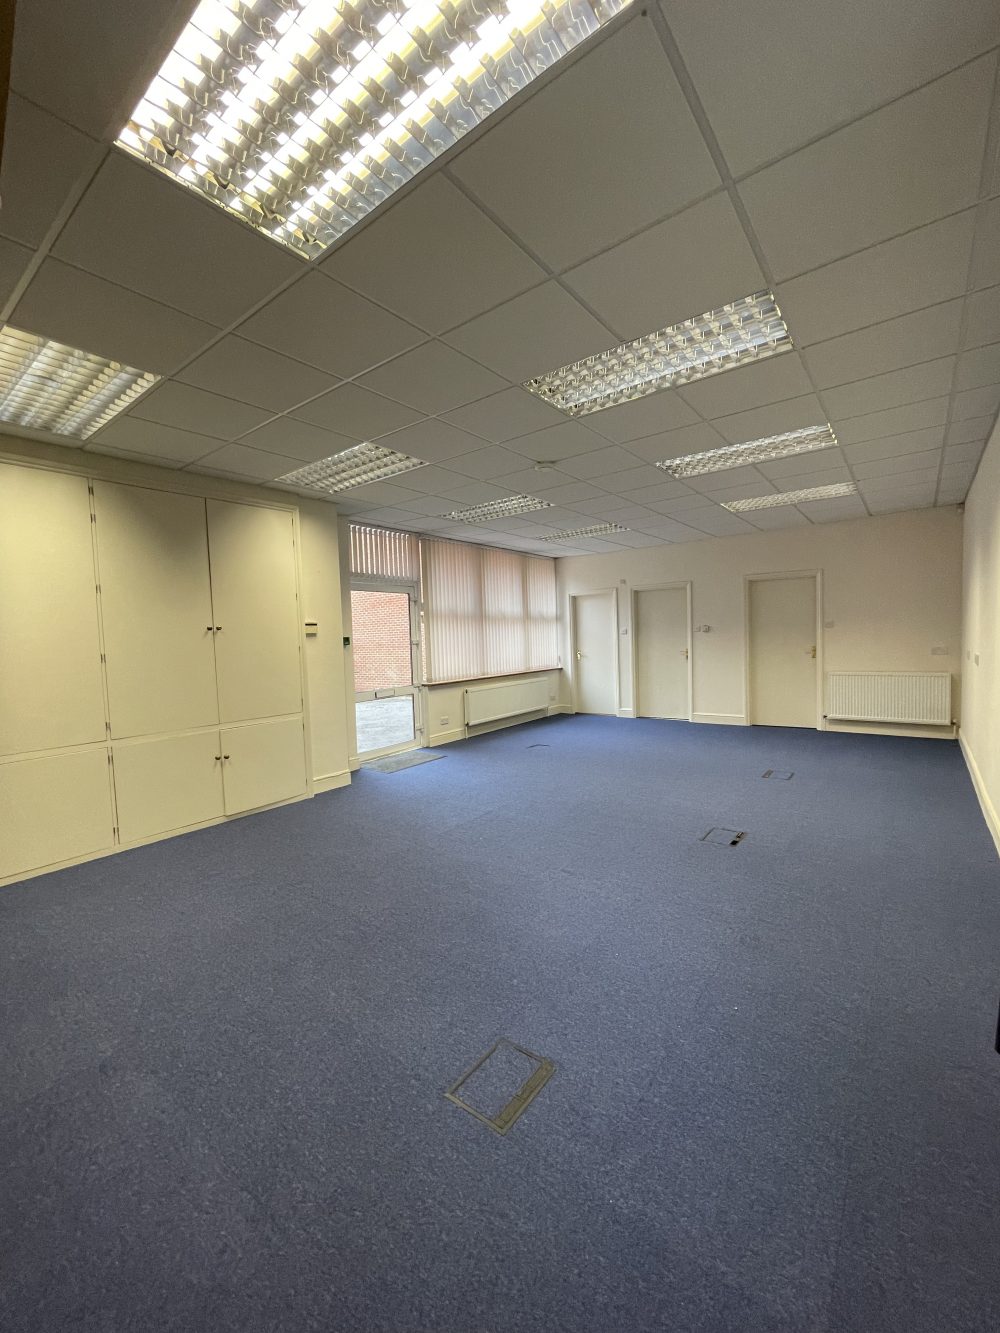 N12 Finchley High Road – Live work unit to rent with parking 15